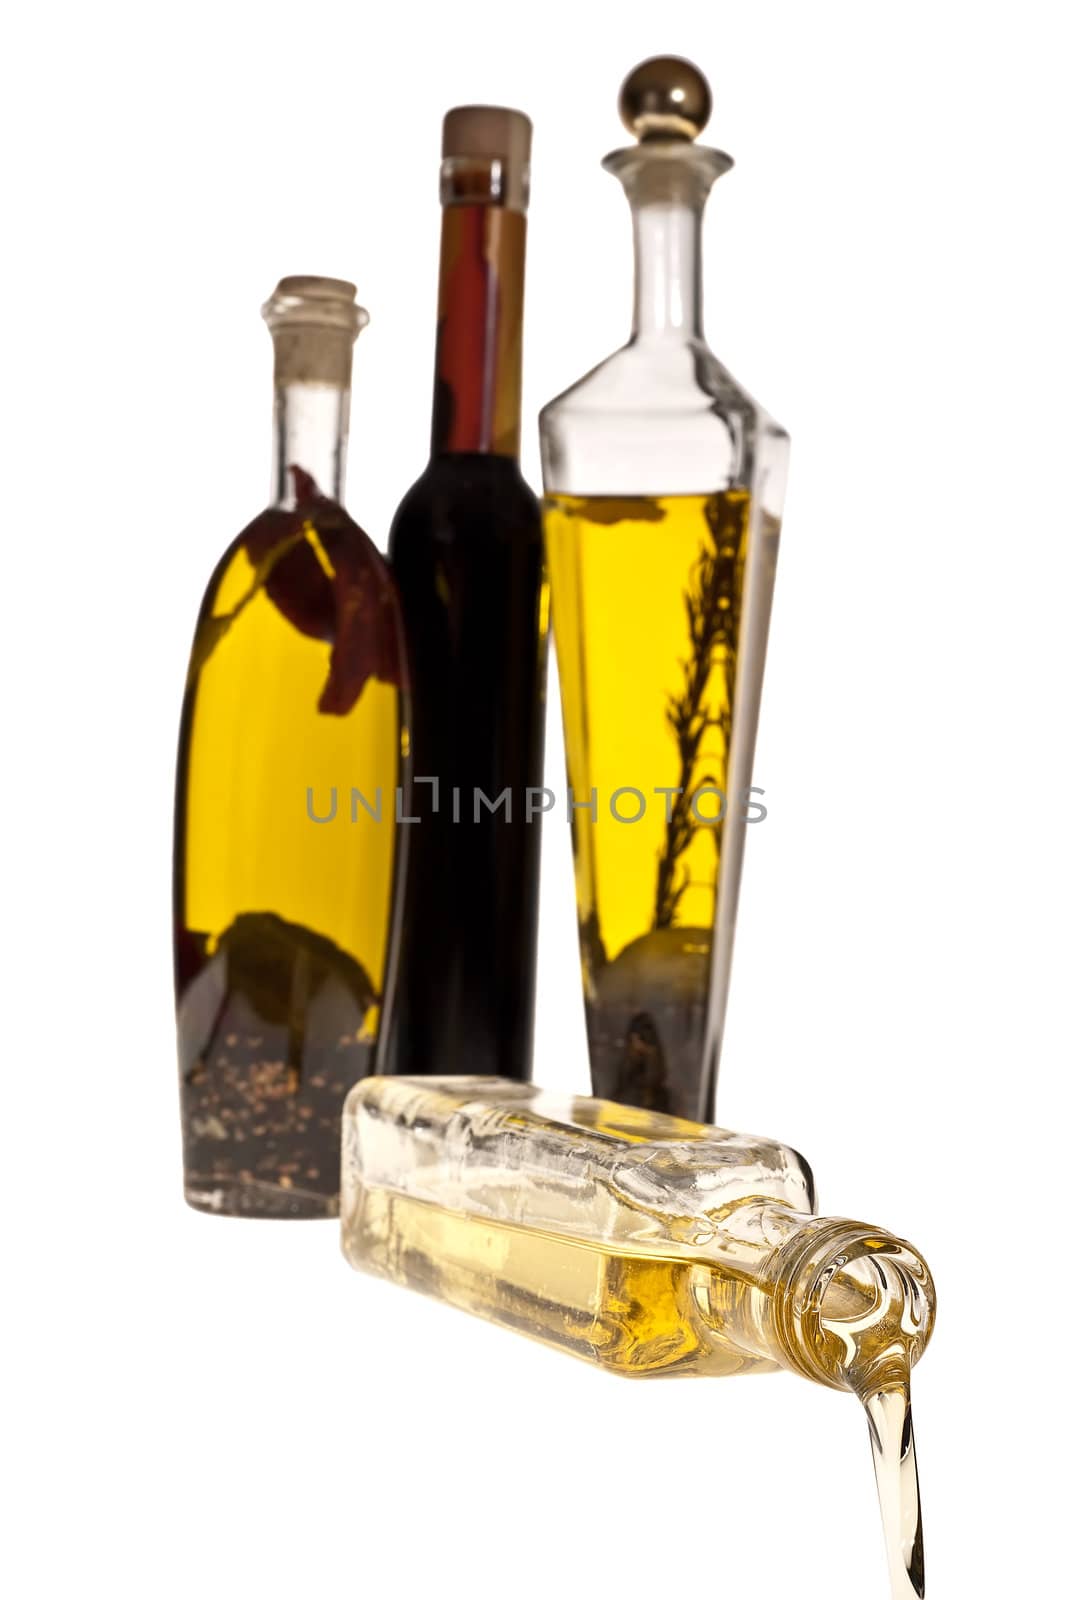 Oil pouring from the bottle image on white background